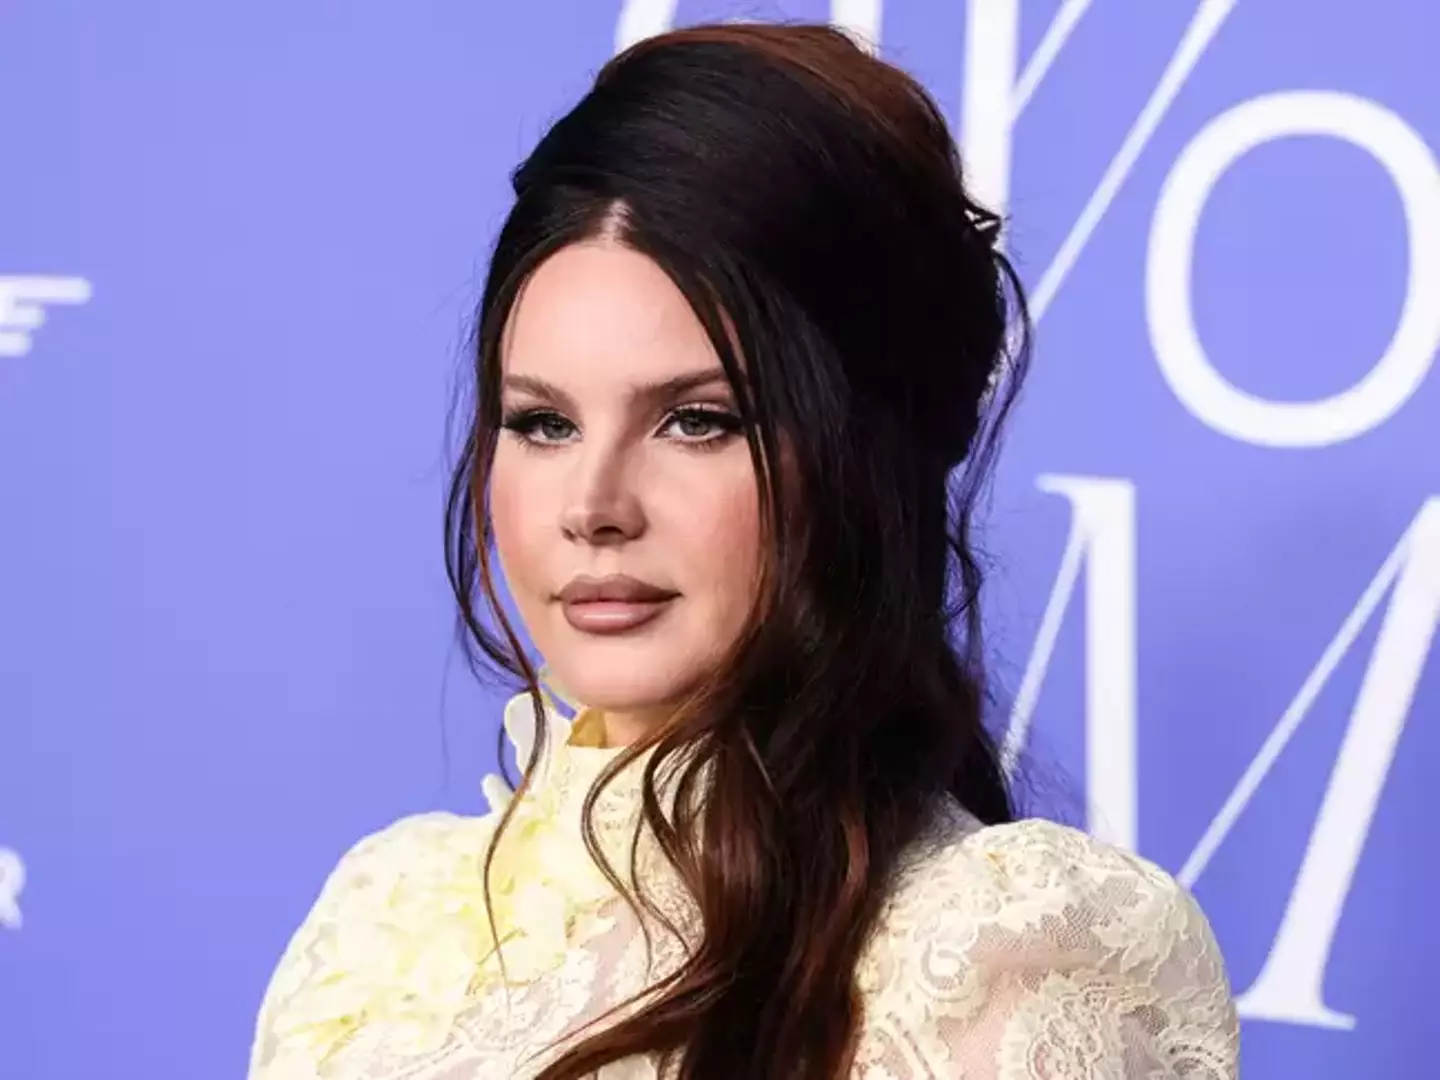 Lana Del Rey has threatened to boycott the festival following the line-up announcement.